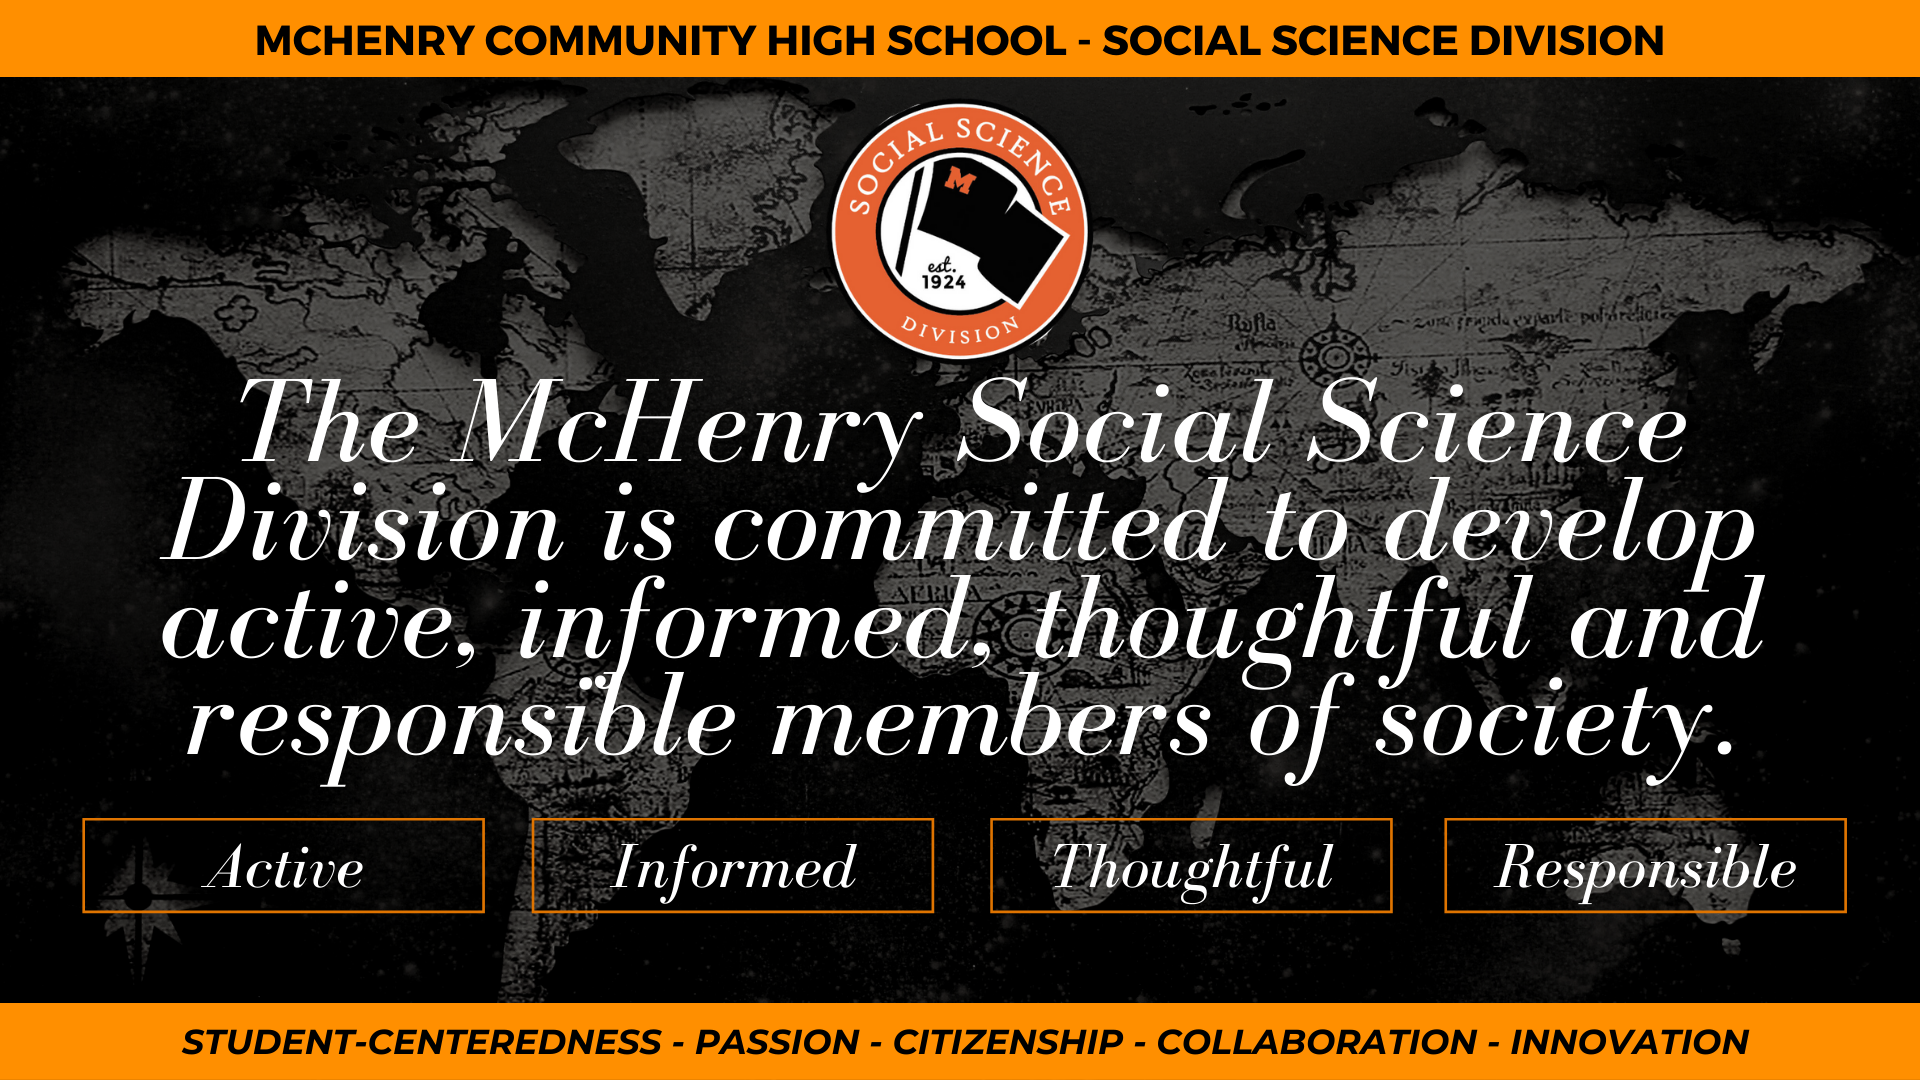 McHenry Community High School- Social Science DivisThe McHeSocial Science Division is committed to develop active, informed, thoughtful, and responsible members of society. Active Informed Thoughtful Repsonsible Student centerdness-passion citezenship collaboration innovationnry ion 